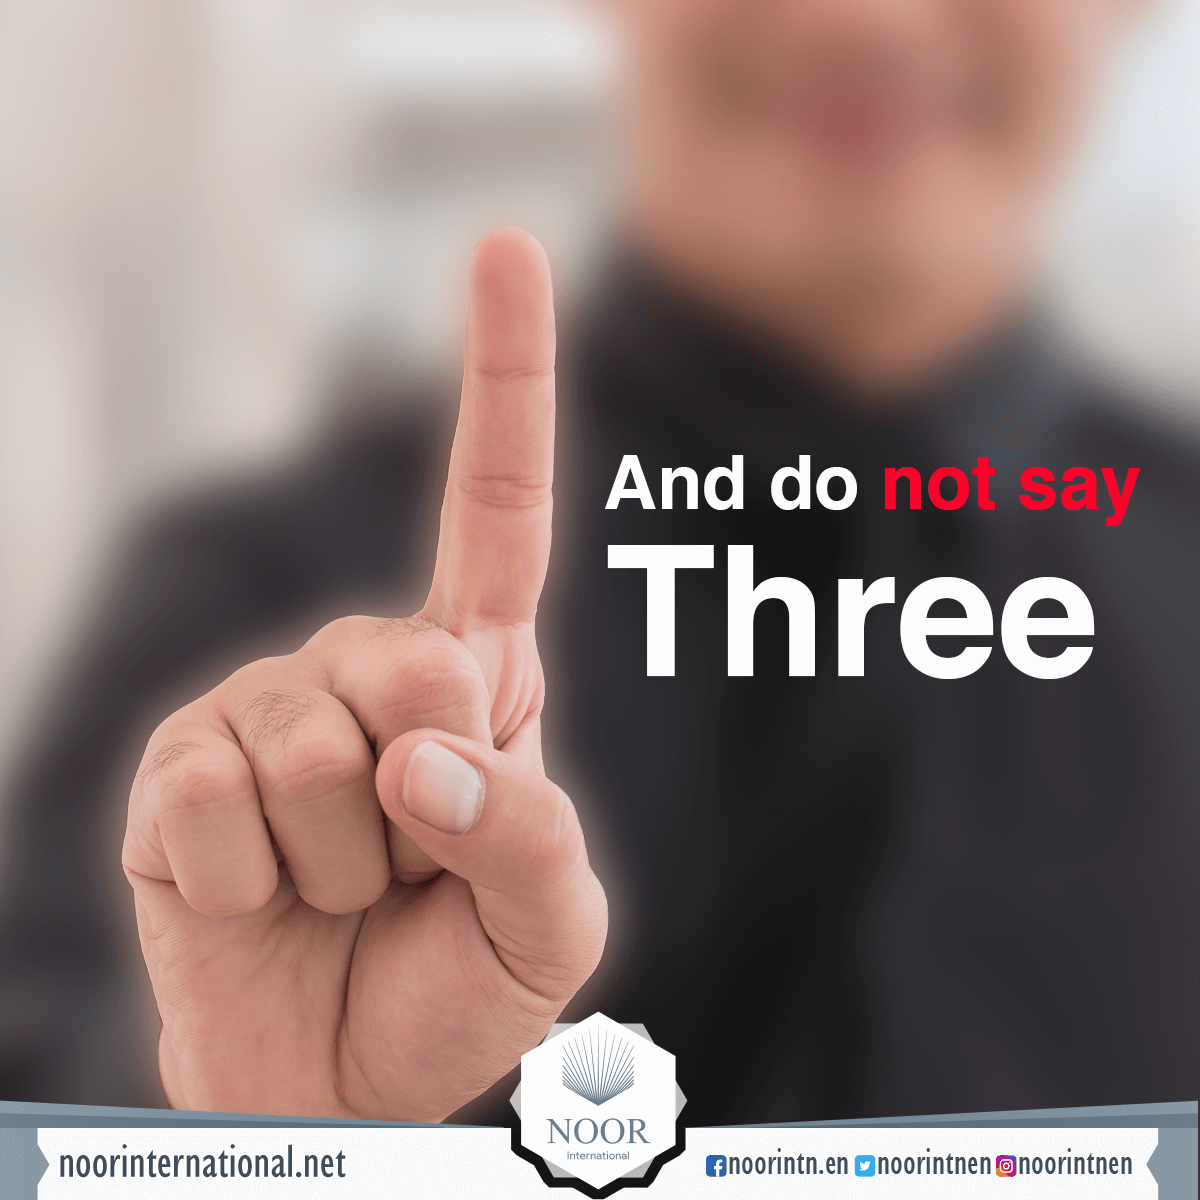 And do not say, "Three"